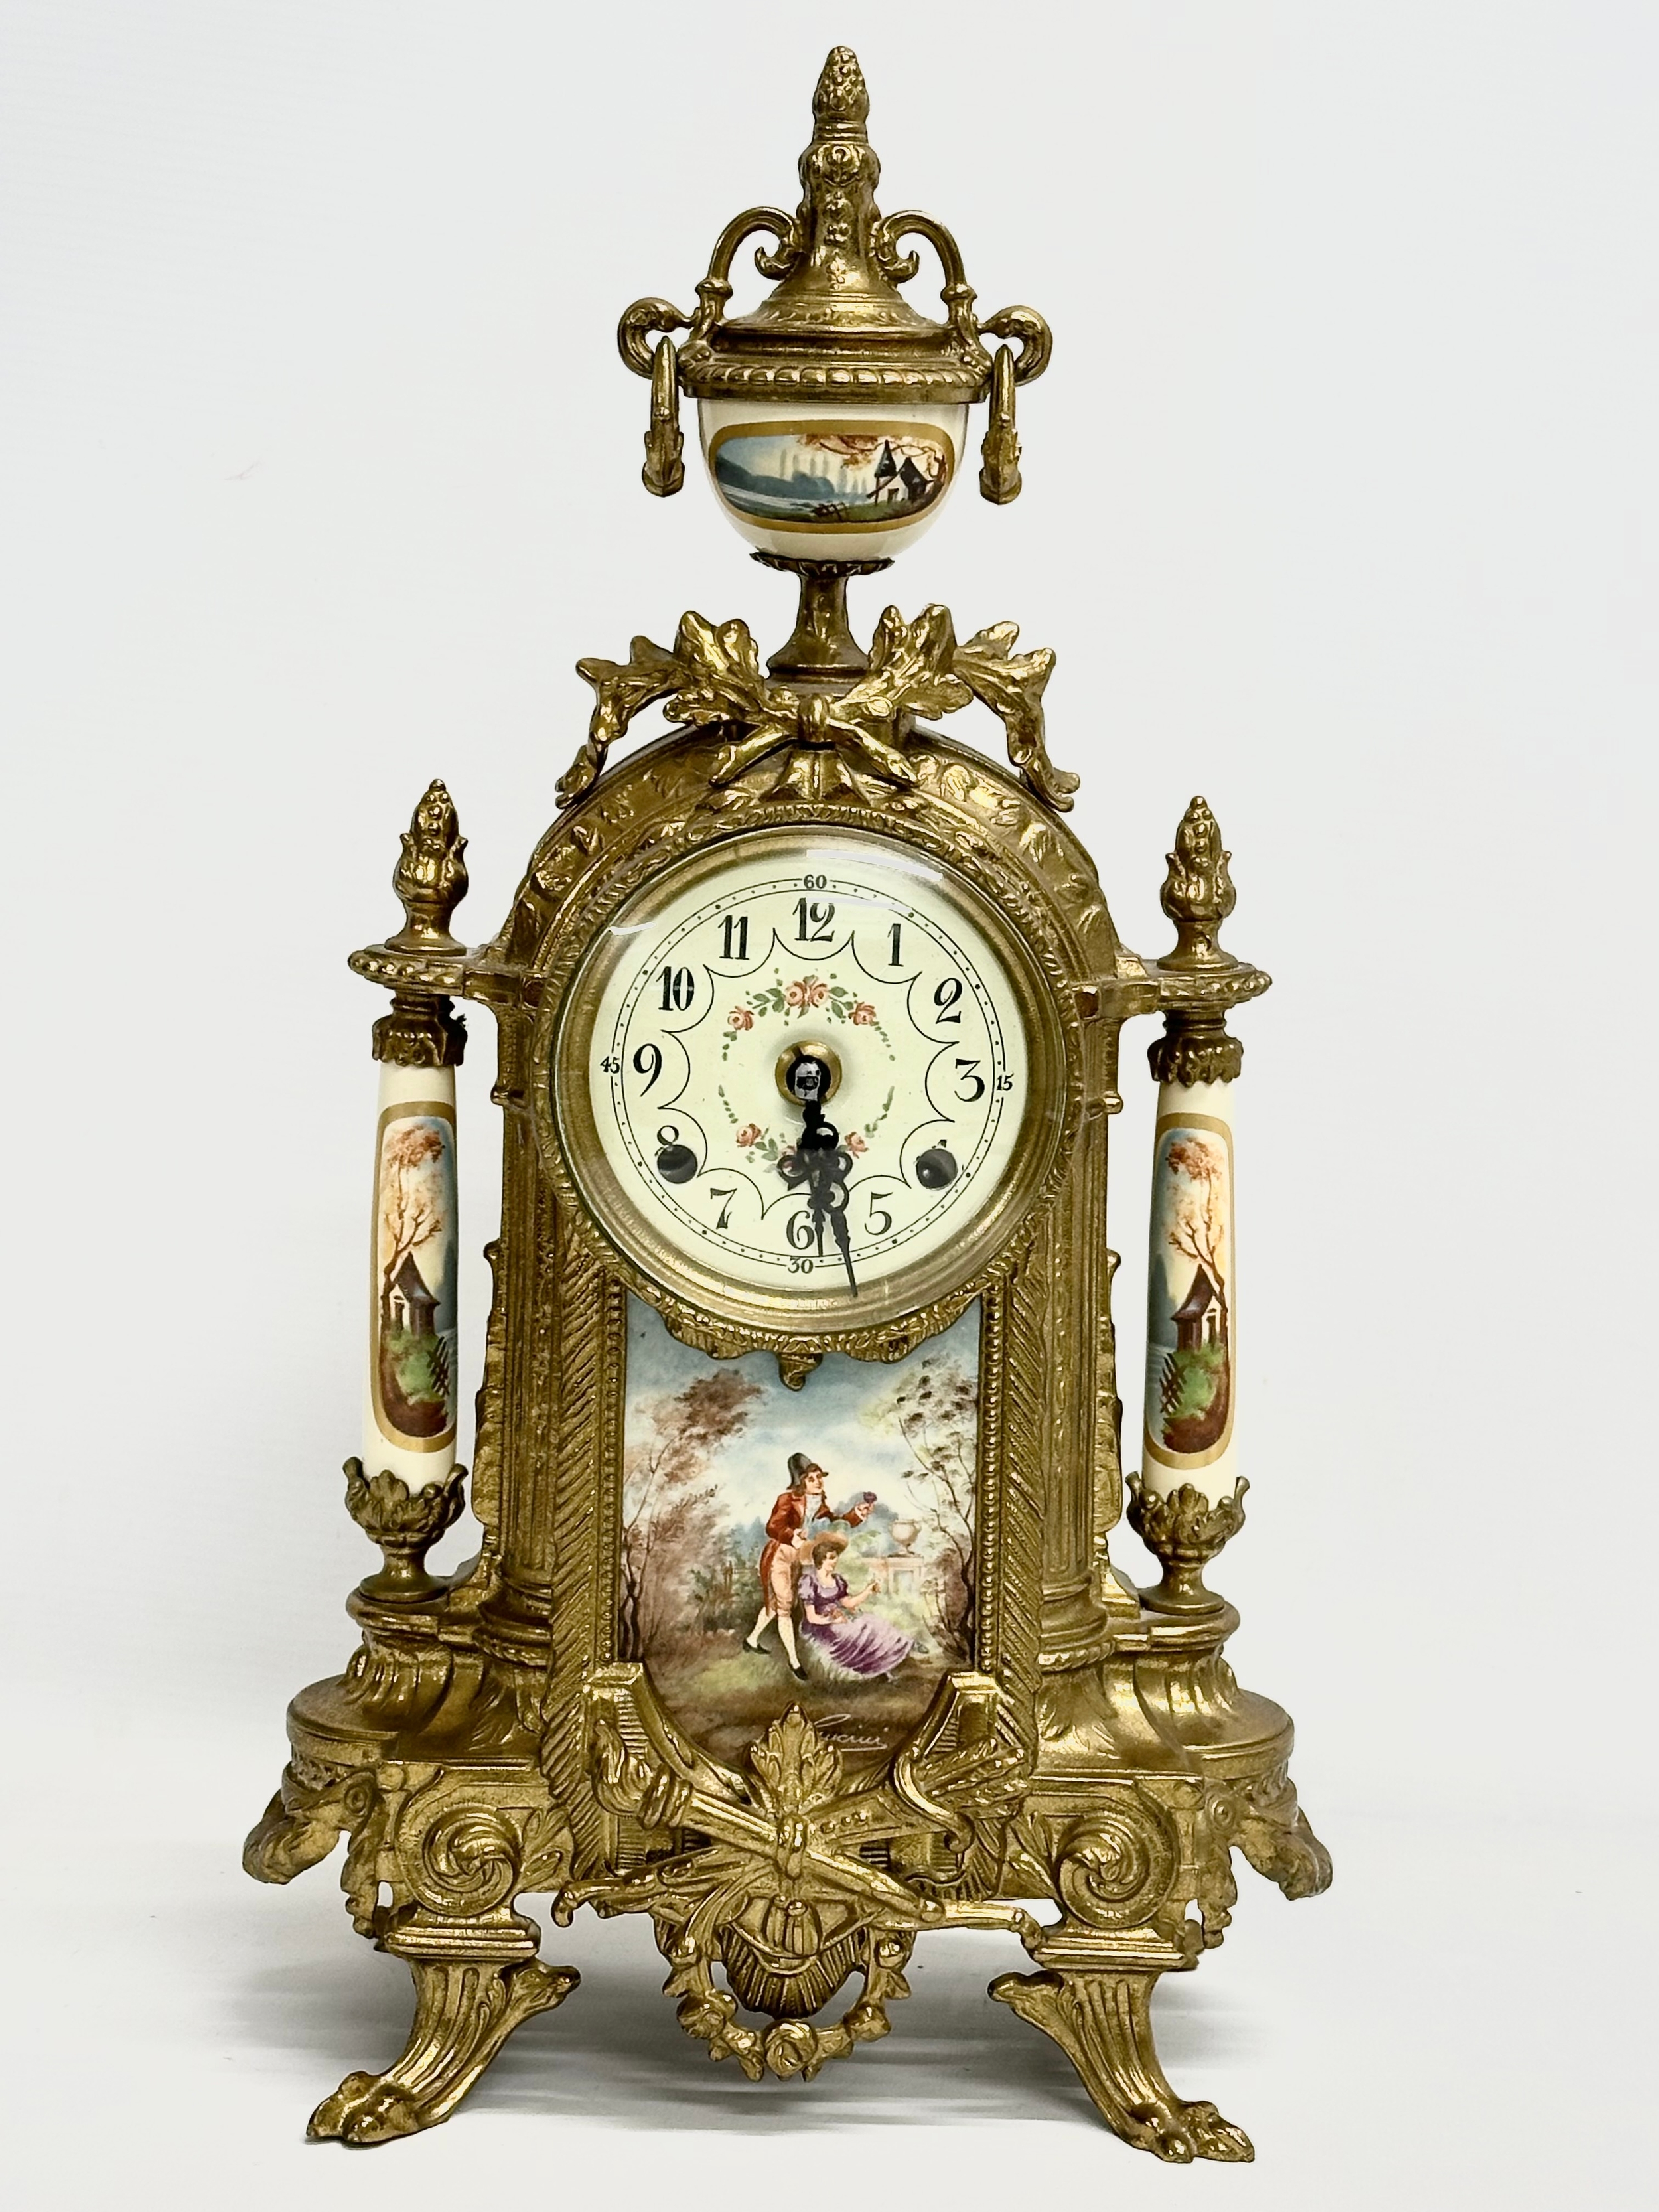 An 18th century style Franz Hermle brass clock set. Clock measures 22x41cm. - Image 3 of 6